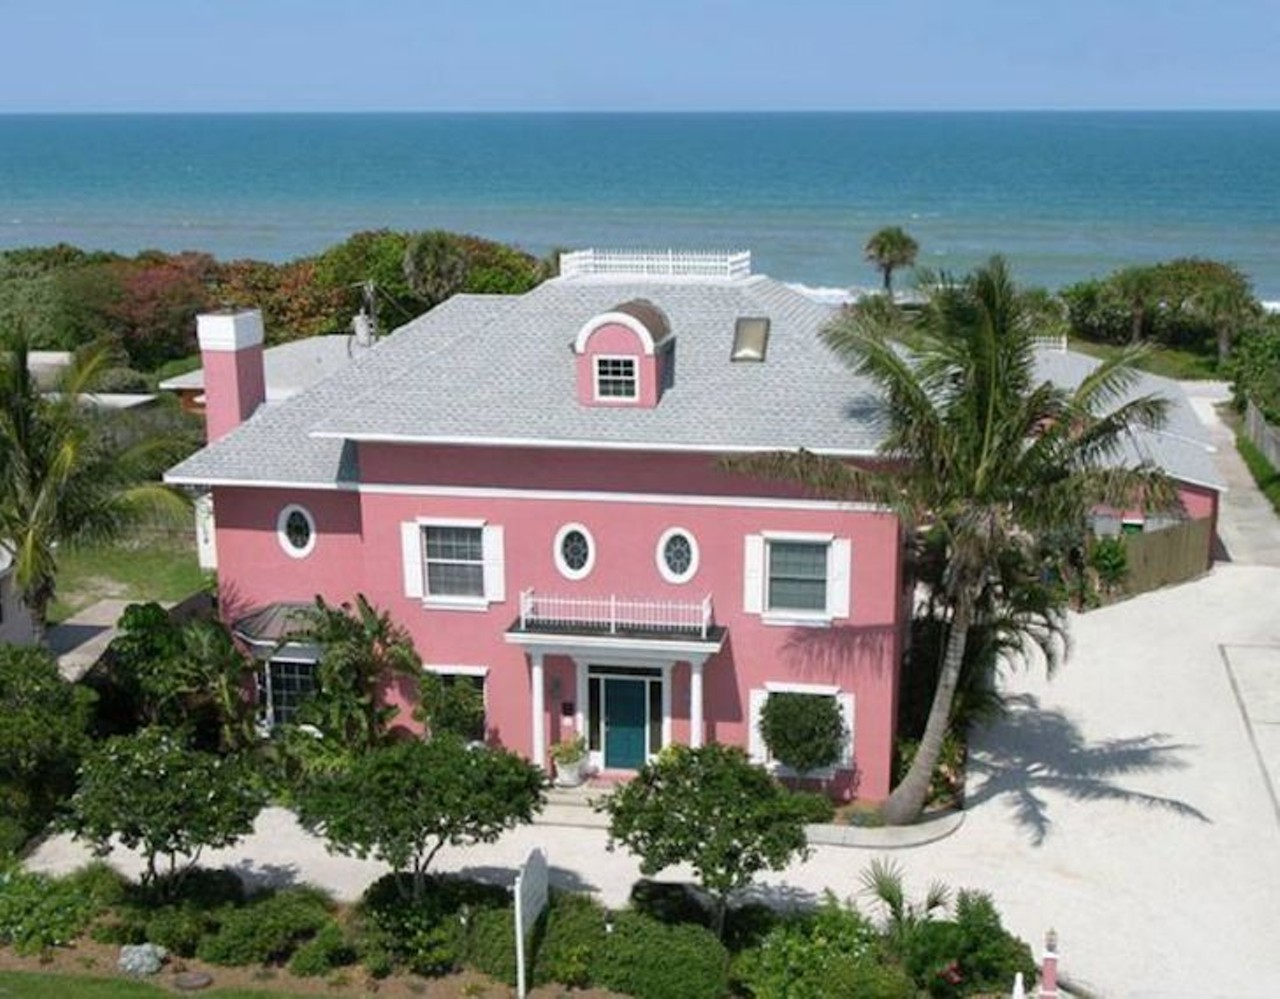 Windemere Inn by the Sea 
815 S. Miramar Ave., Indialantic, 321-728-9334,
Estimated drive time from Orlando: About 1.5 hours
Cost per night: $195-$285 
The Windemere Inn offers a coastal retreat on a barrier island, with the Atlantic Ocean on one side and the Indian River Lagoon on the other. On-site masseuse services provide the perfect end to a day of enjoying the beach. Visitors are also eligible for discounted rates on Victory Casino Cruises.
Photo via Windemere Inn by the Sea/Facebook